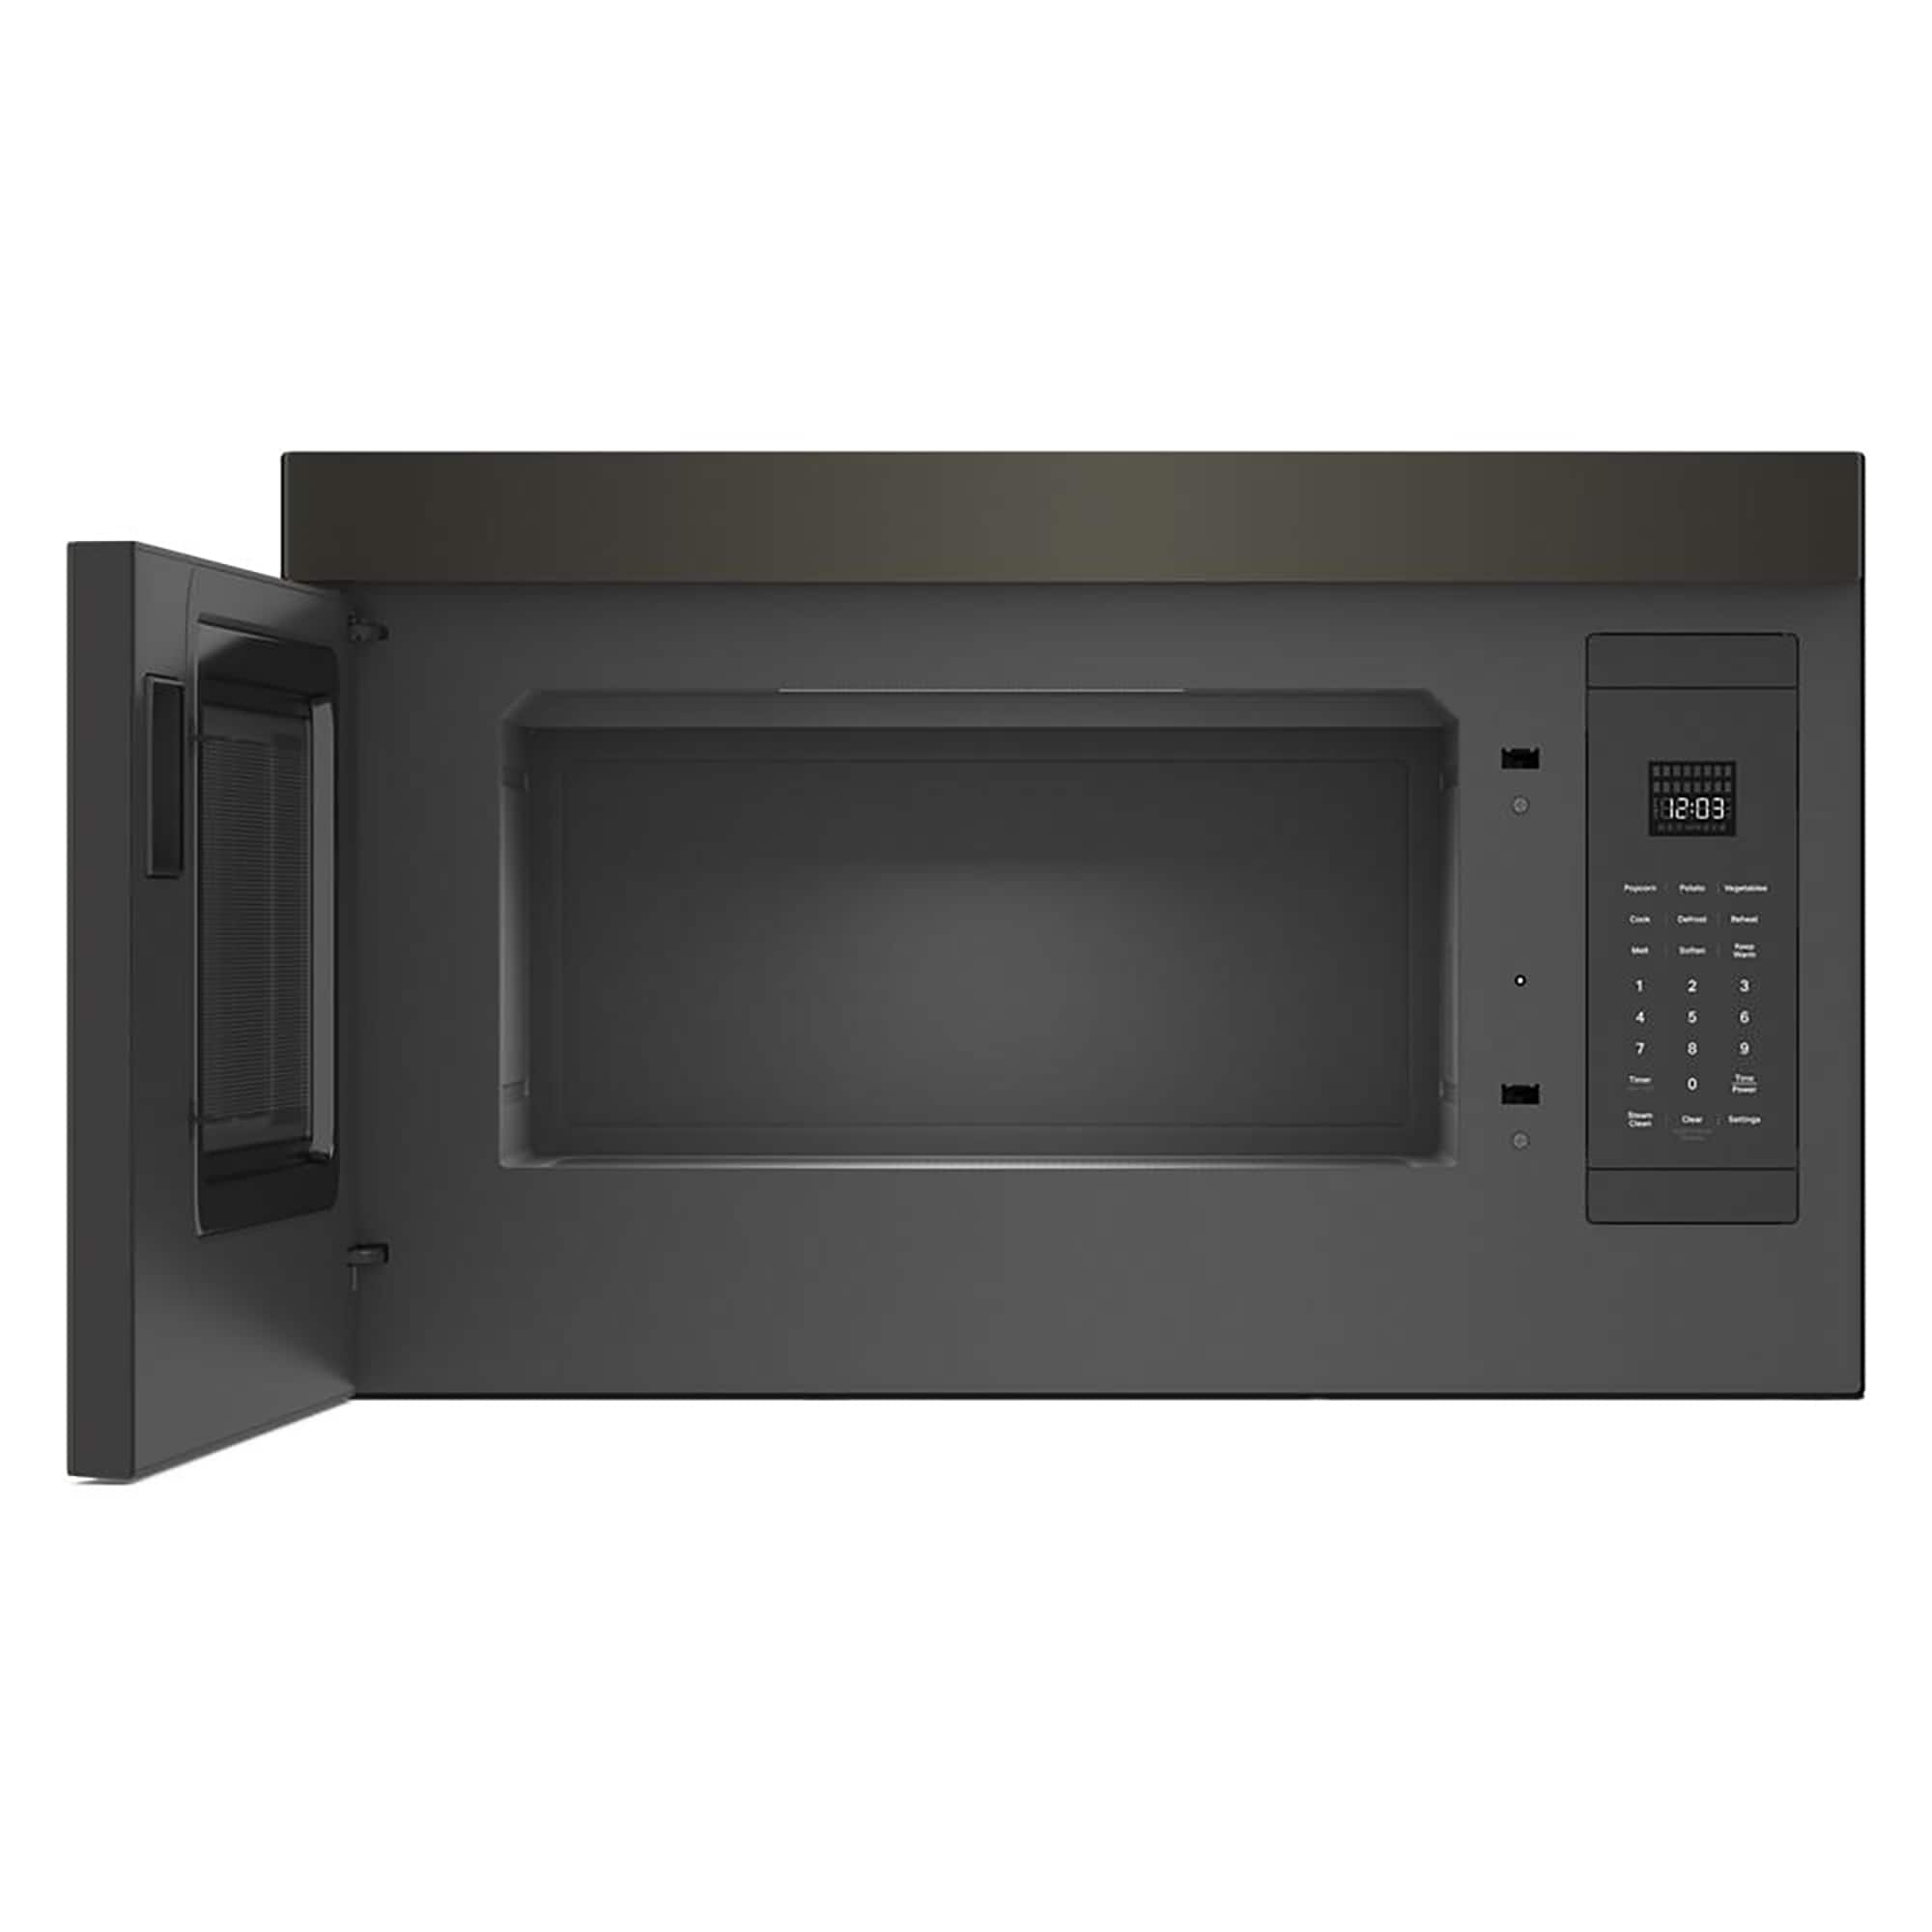 KitchenAid 30 1.1 Cu. Ft. Over-the-Range Microwave with 10 Power Levels,  500 CFM & Sensor Cooking Controls - Black Stainless Steel with PrintShield  Finish